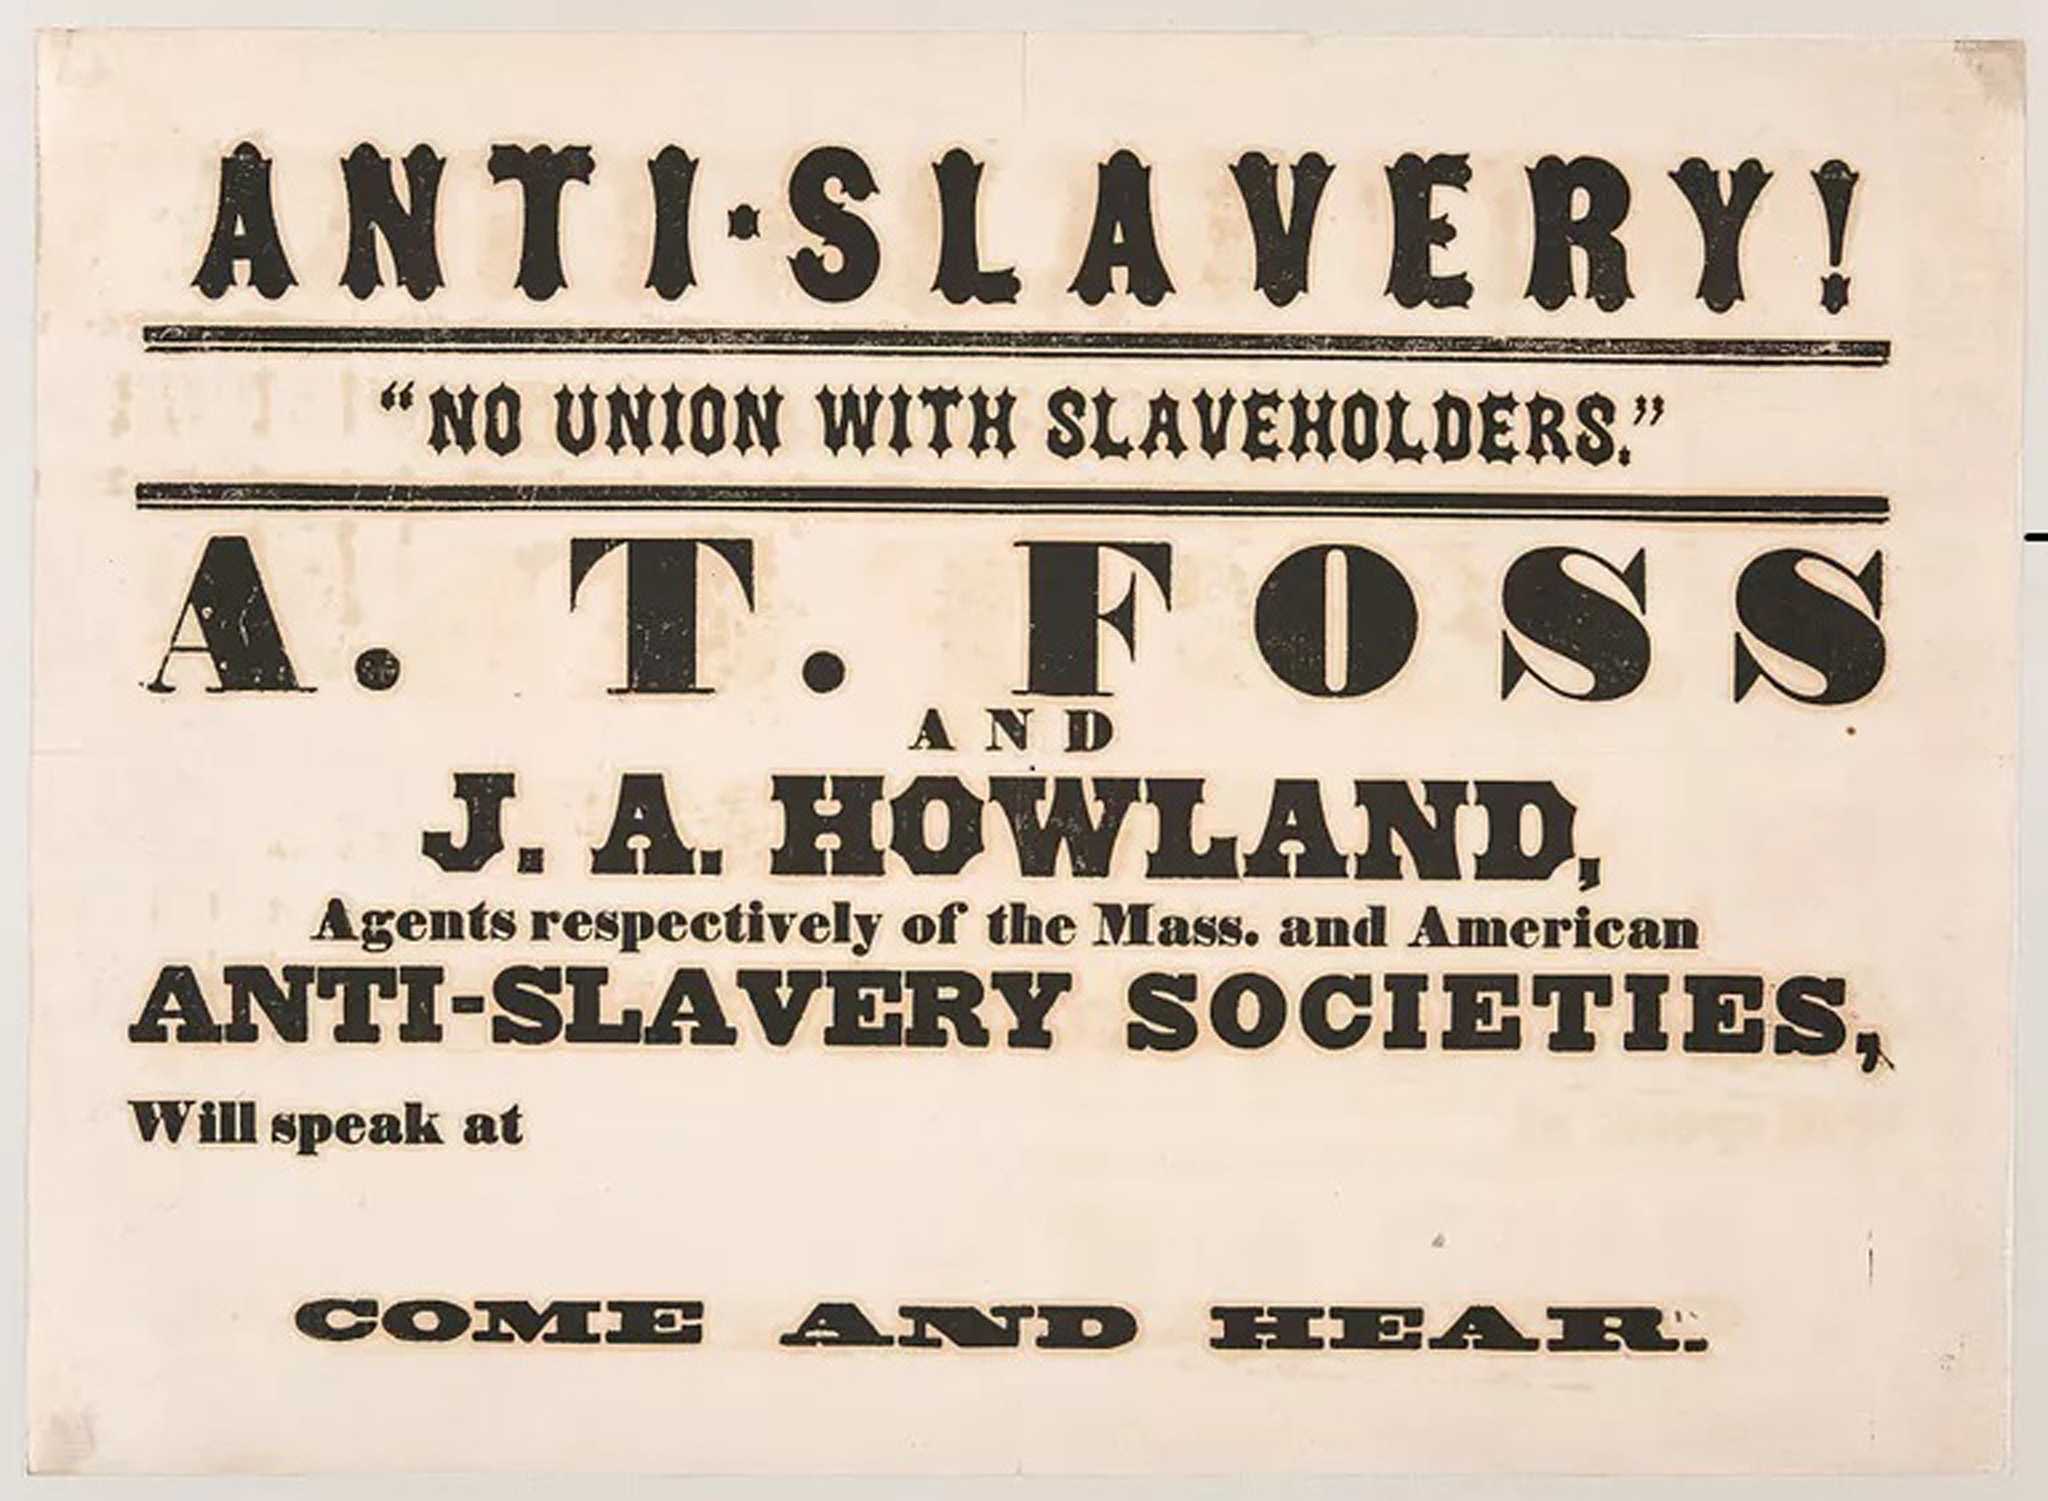 document image of flier for "No Union with Slaveholders Broadside"